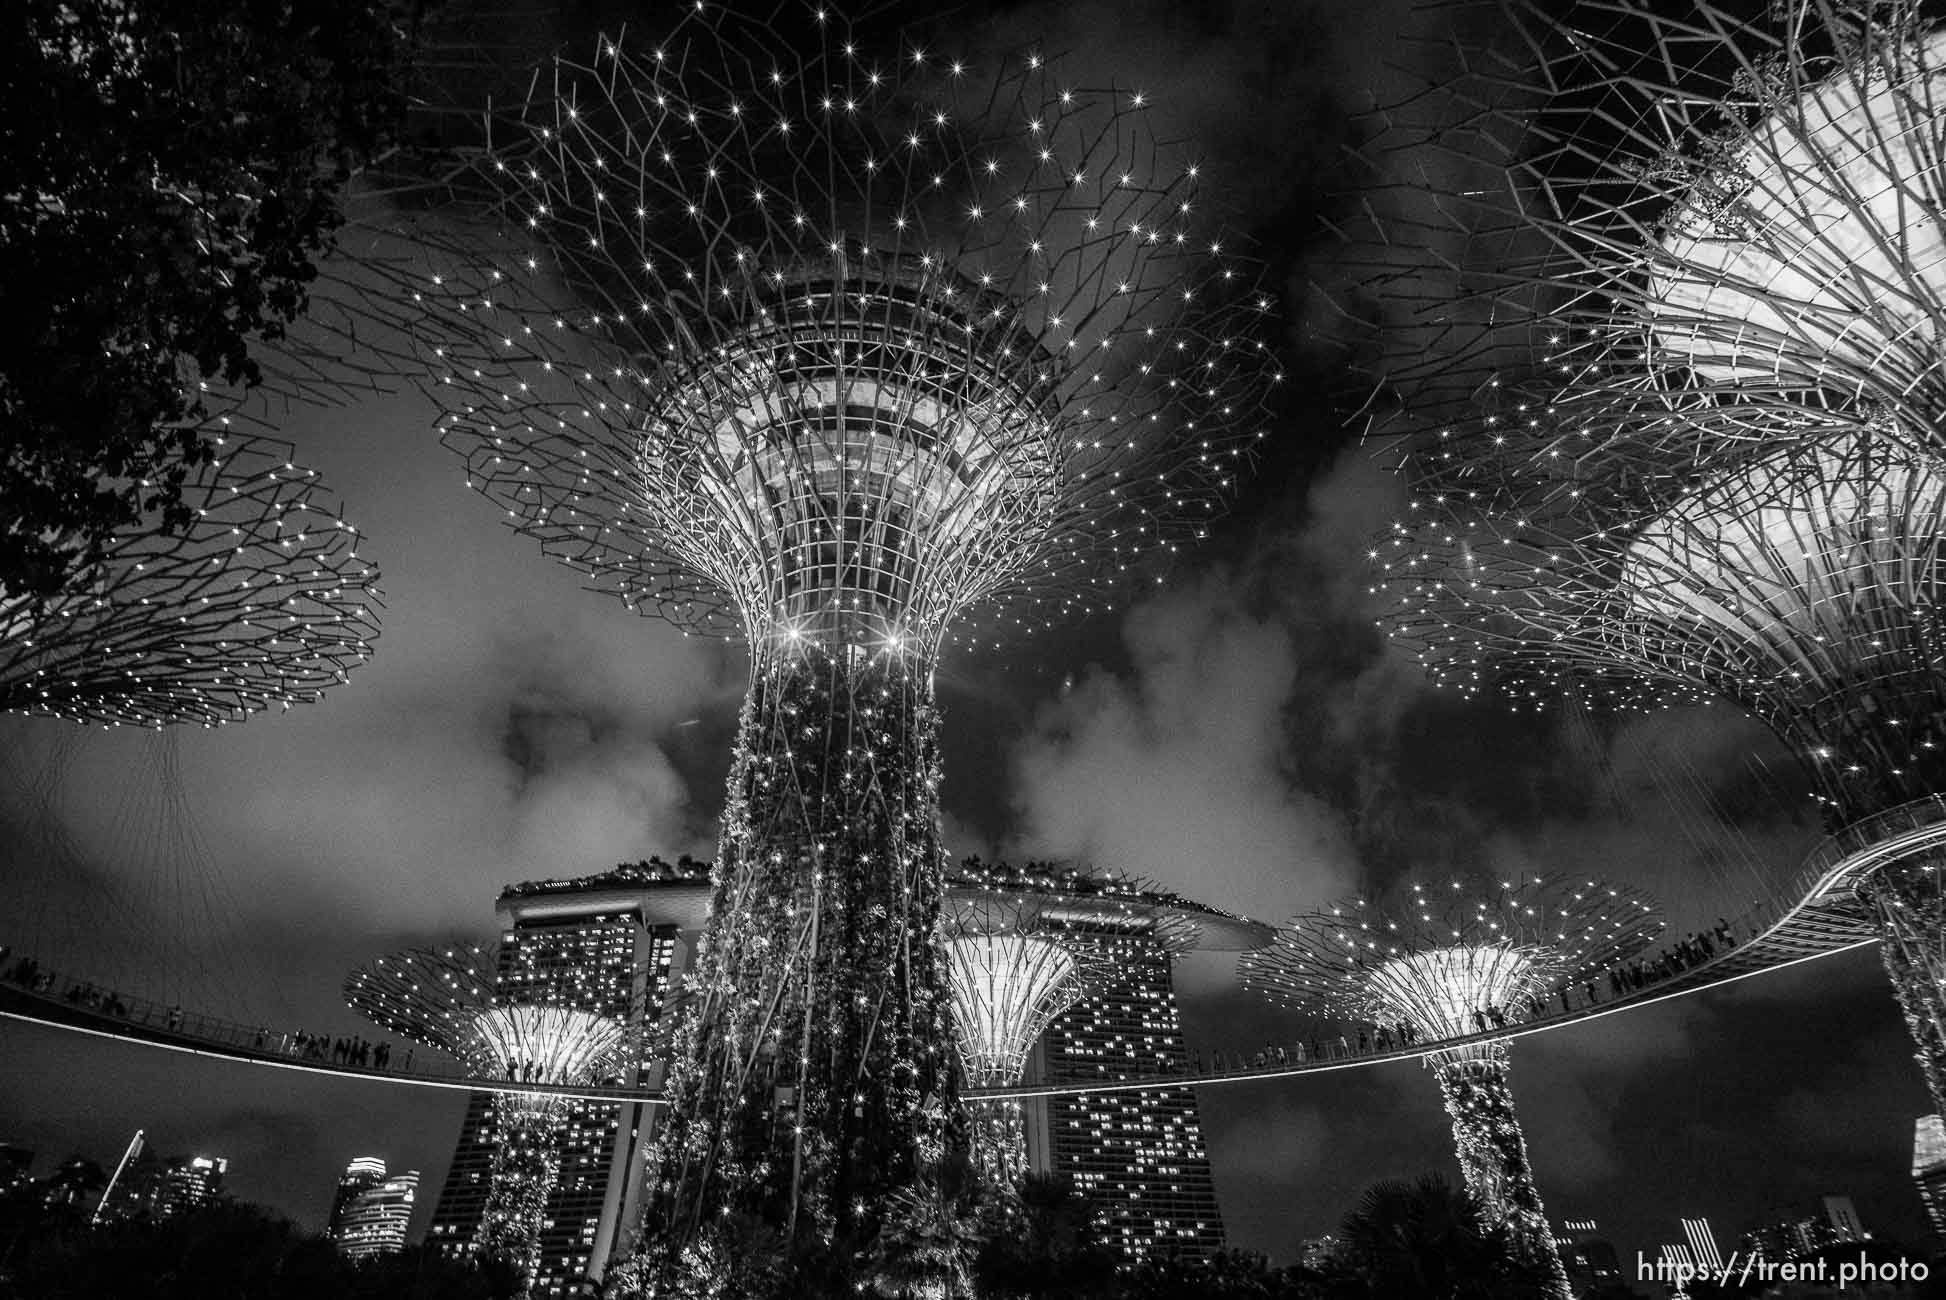 Gardens at the Bay light show, Singapore, July 26, 2019